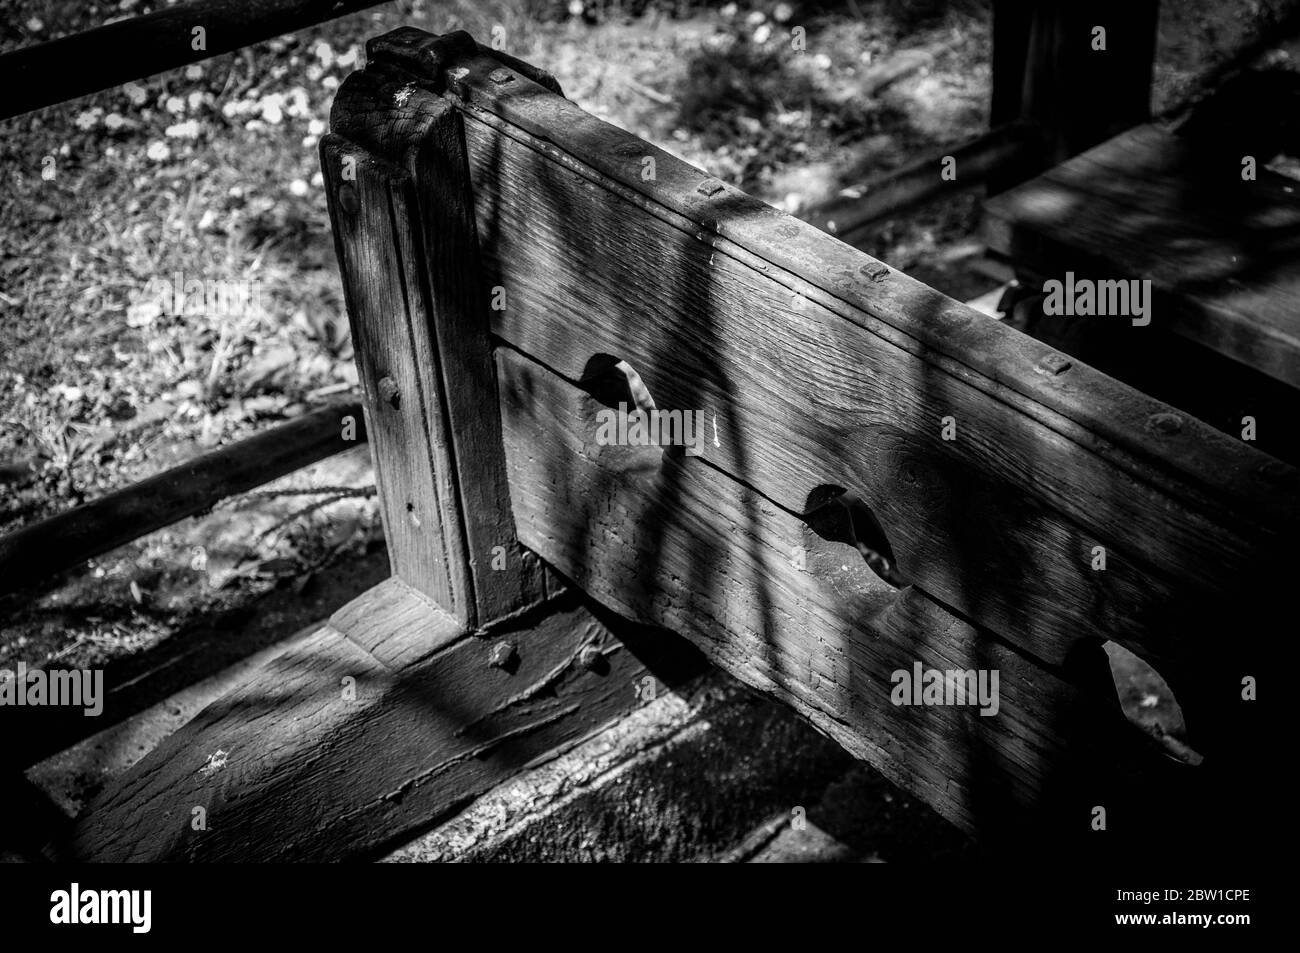 Stocks and Pillory, Pinchbeck, Lincolnshire, close-up black and white Stock Photo